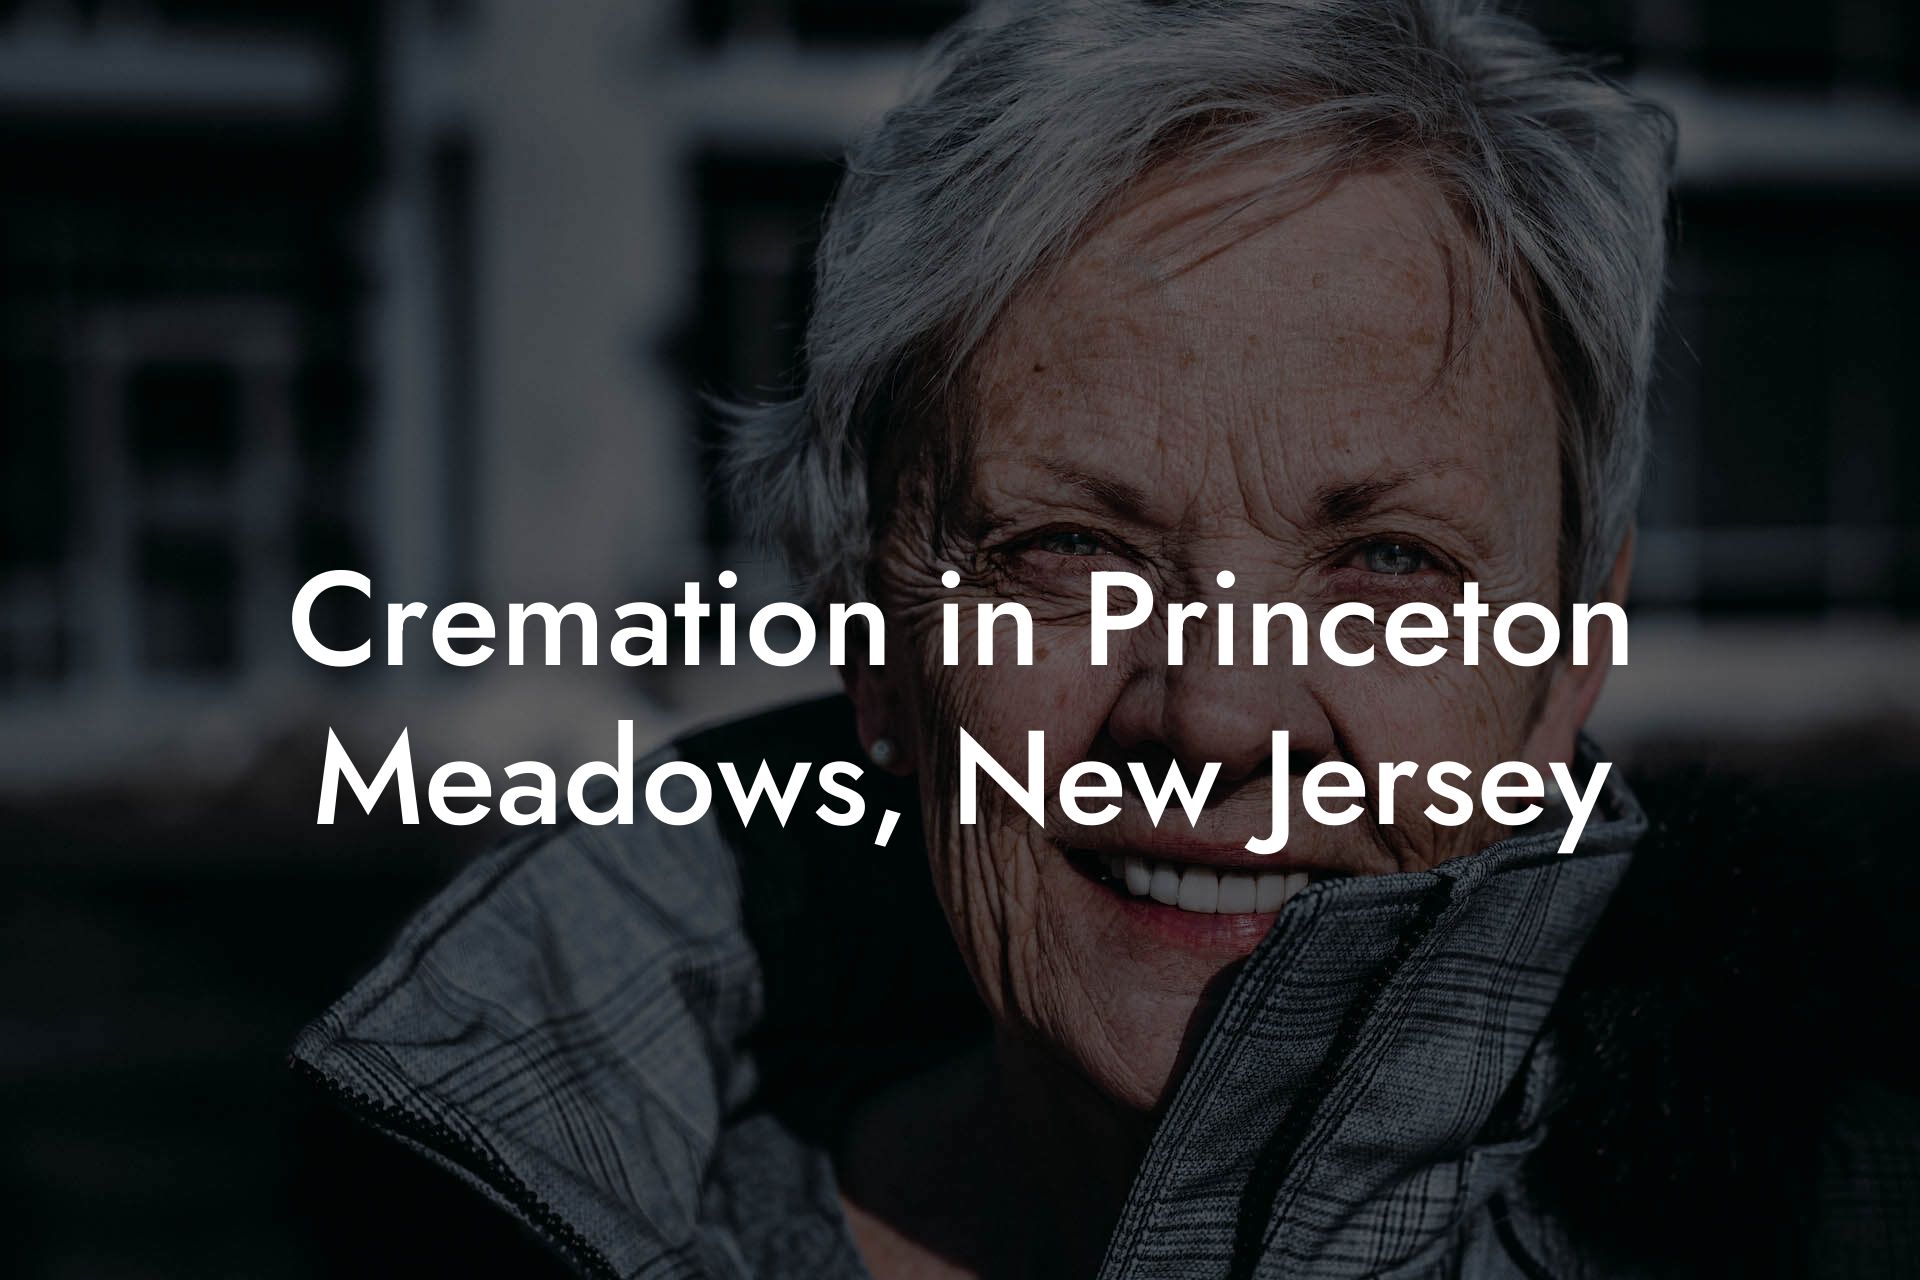 Cremation in Princeton Meadows, New Jersey